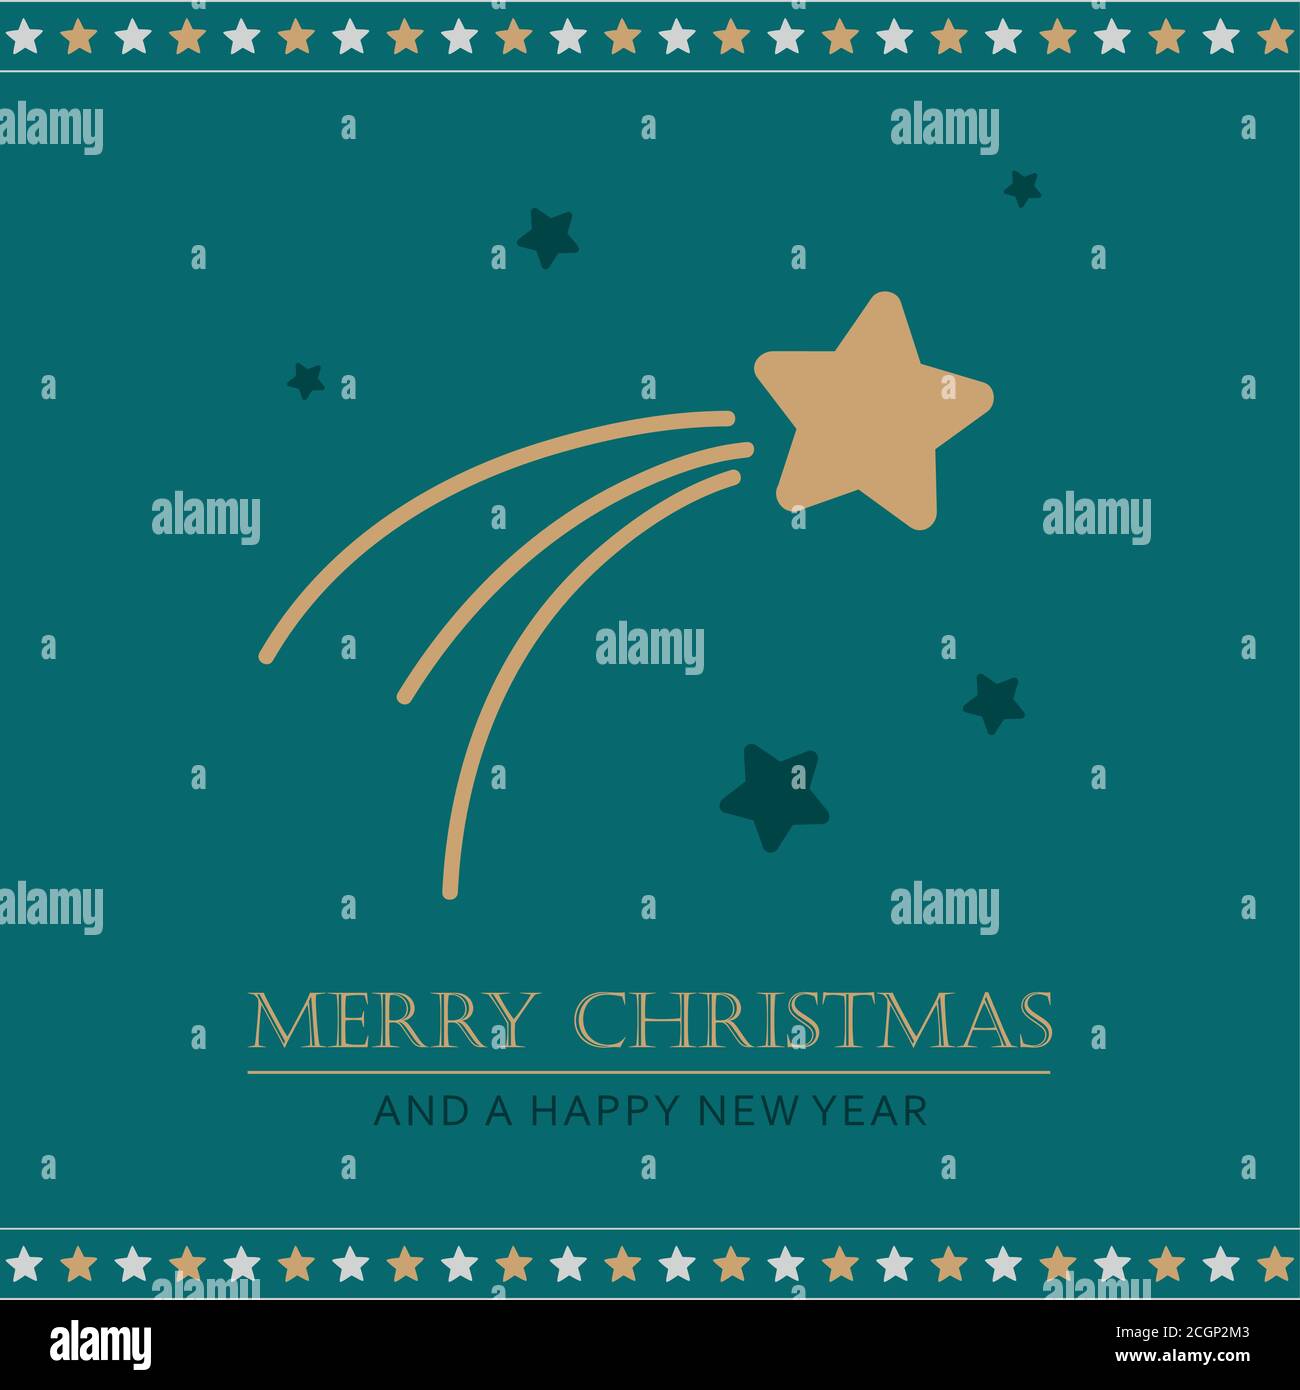 christmas greeting card with falling star vector illustration EPS10 Stock Vector